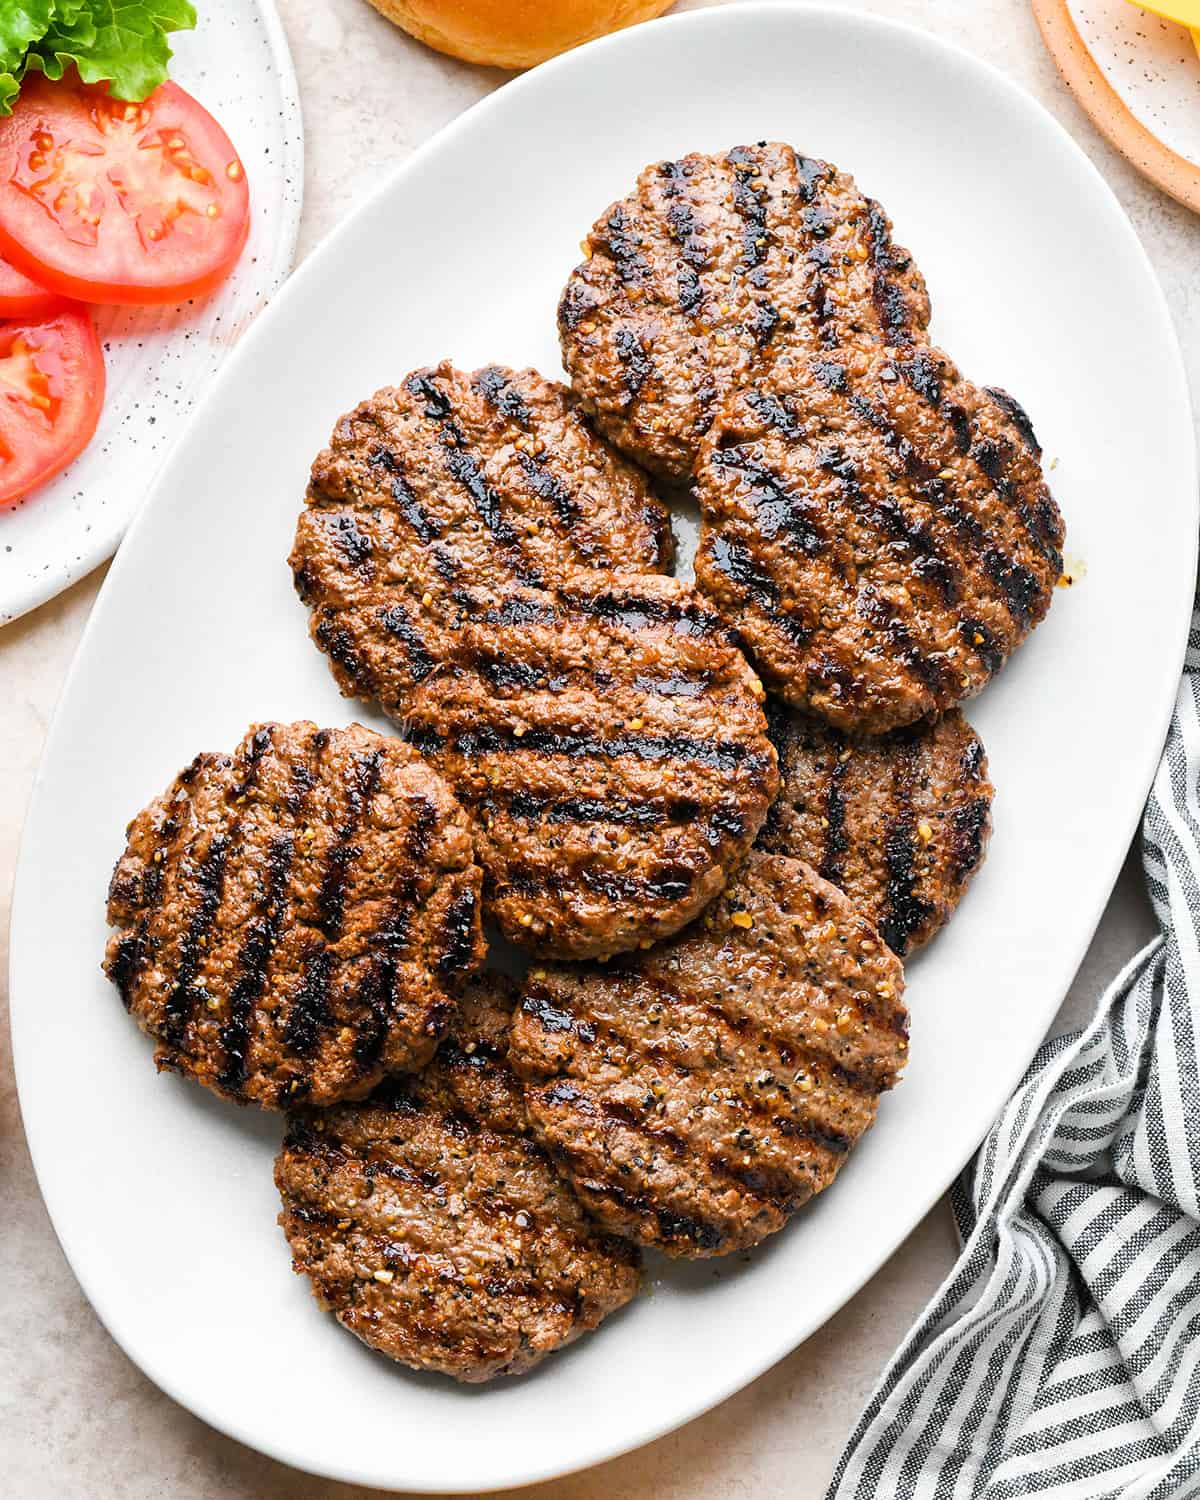 8 grilled hamburger patties on a plate